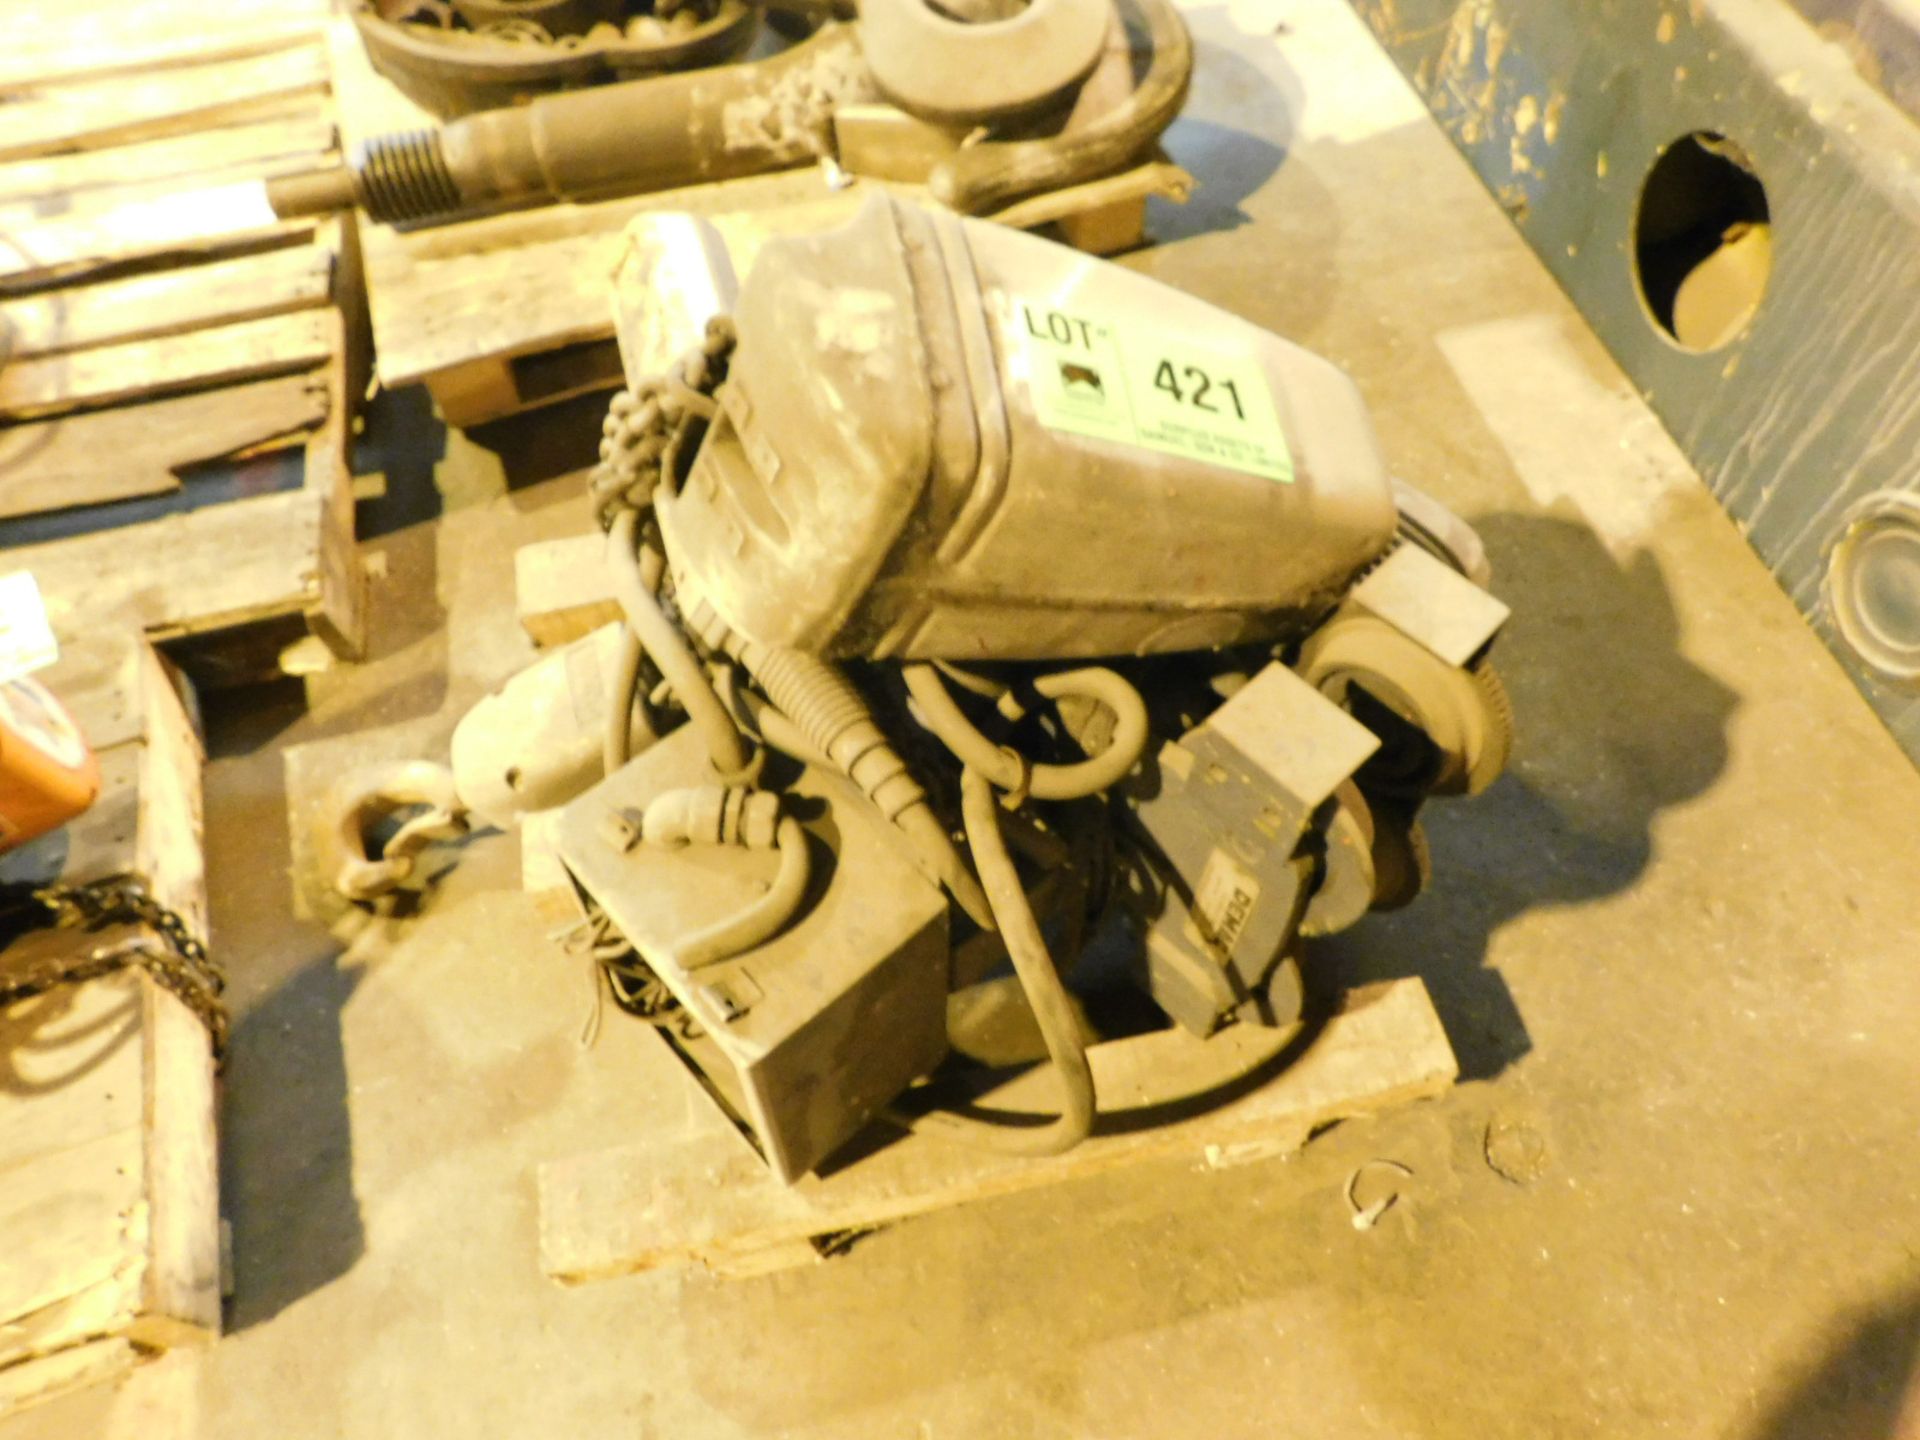 DEMAG 2 TON ELECTRIC HOIST WITH TROLLEY (BLDG 1)